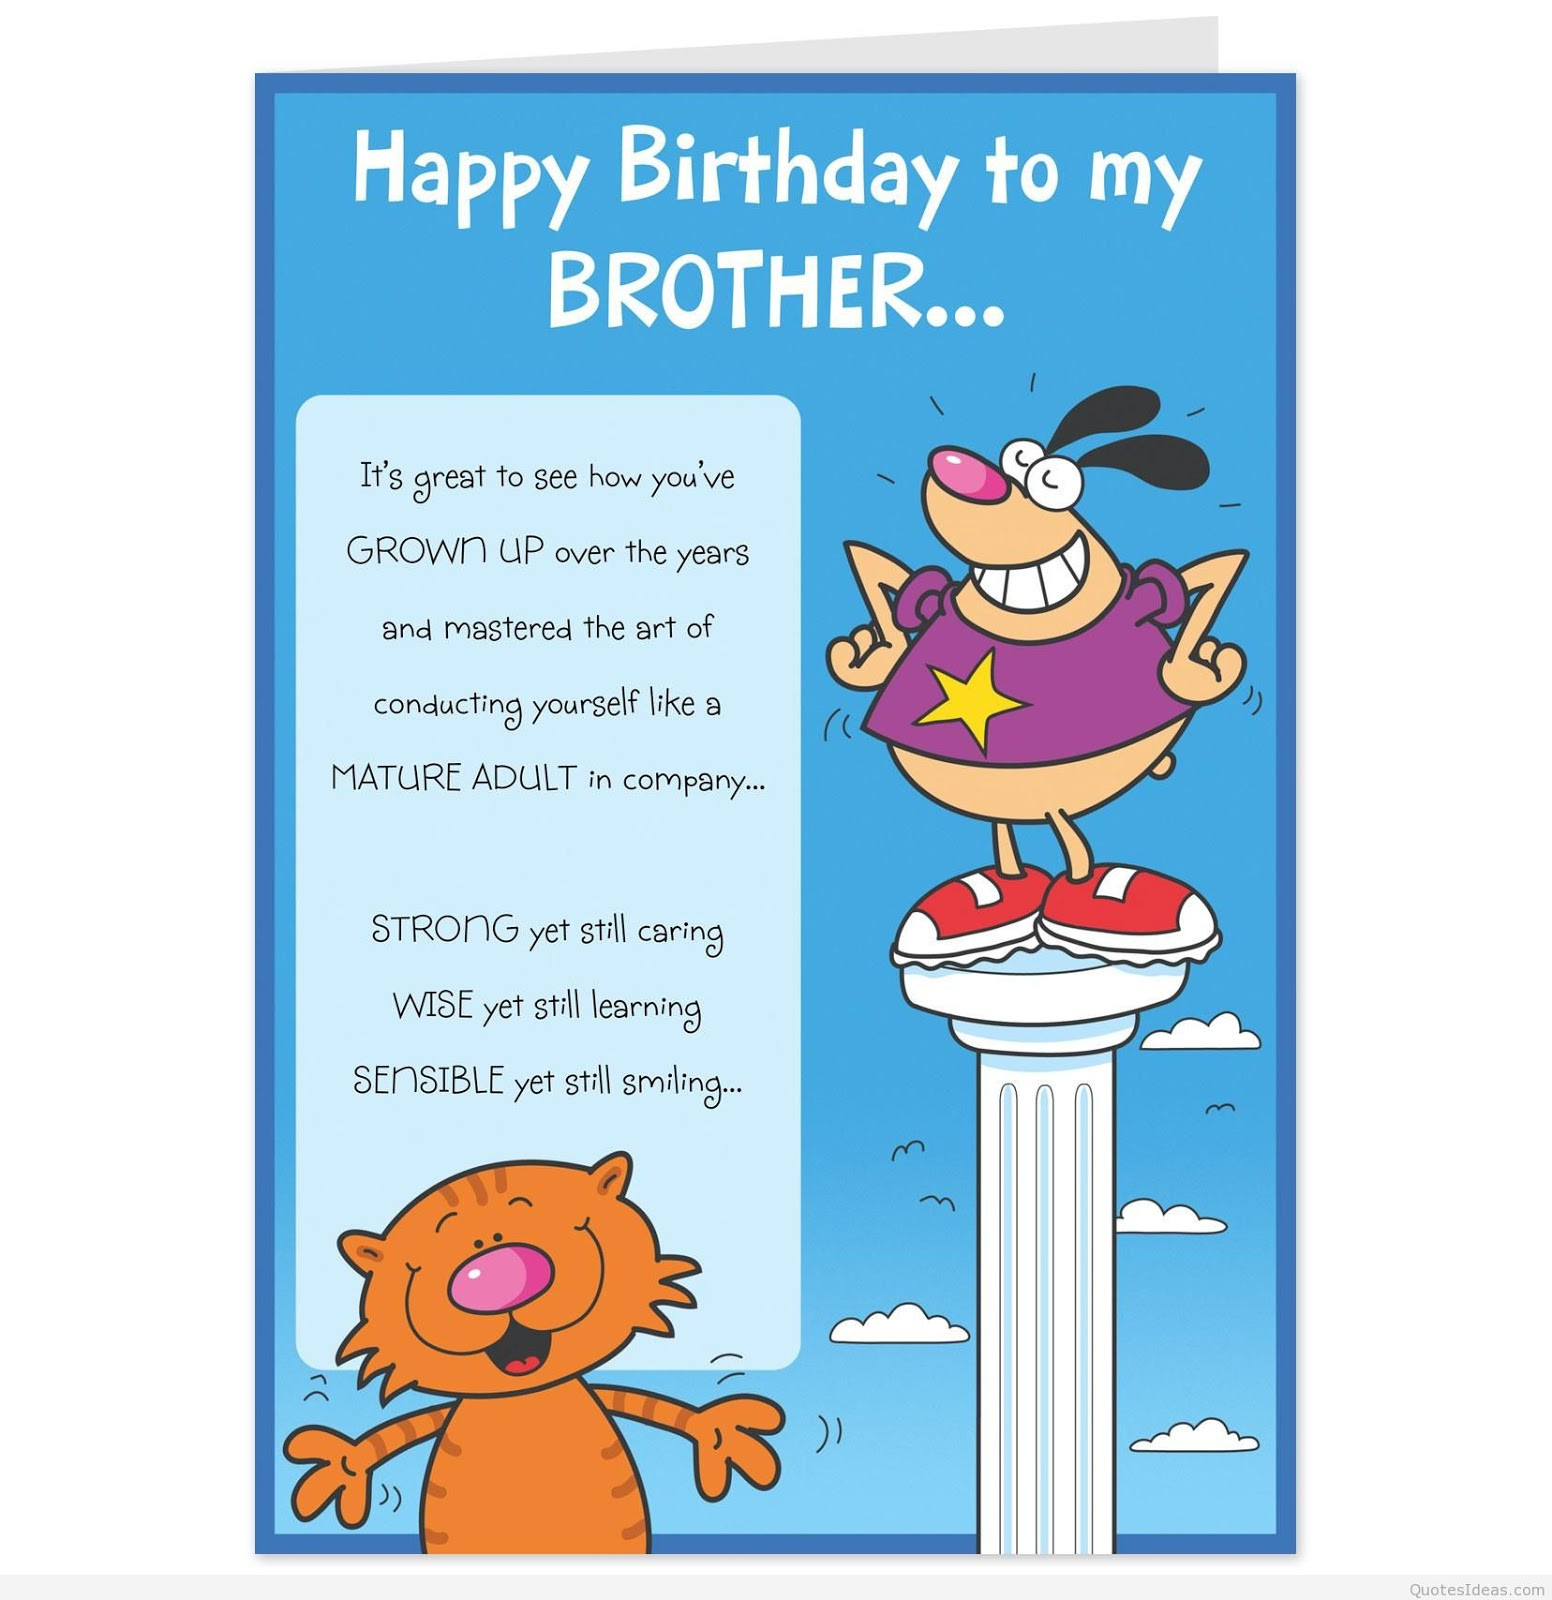 Happy Birthday Quotes For A Brother
 HAPPY BIRTHDAY BROTHER QUOTES quotes for brother Good